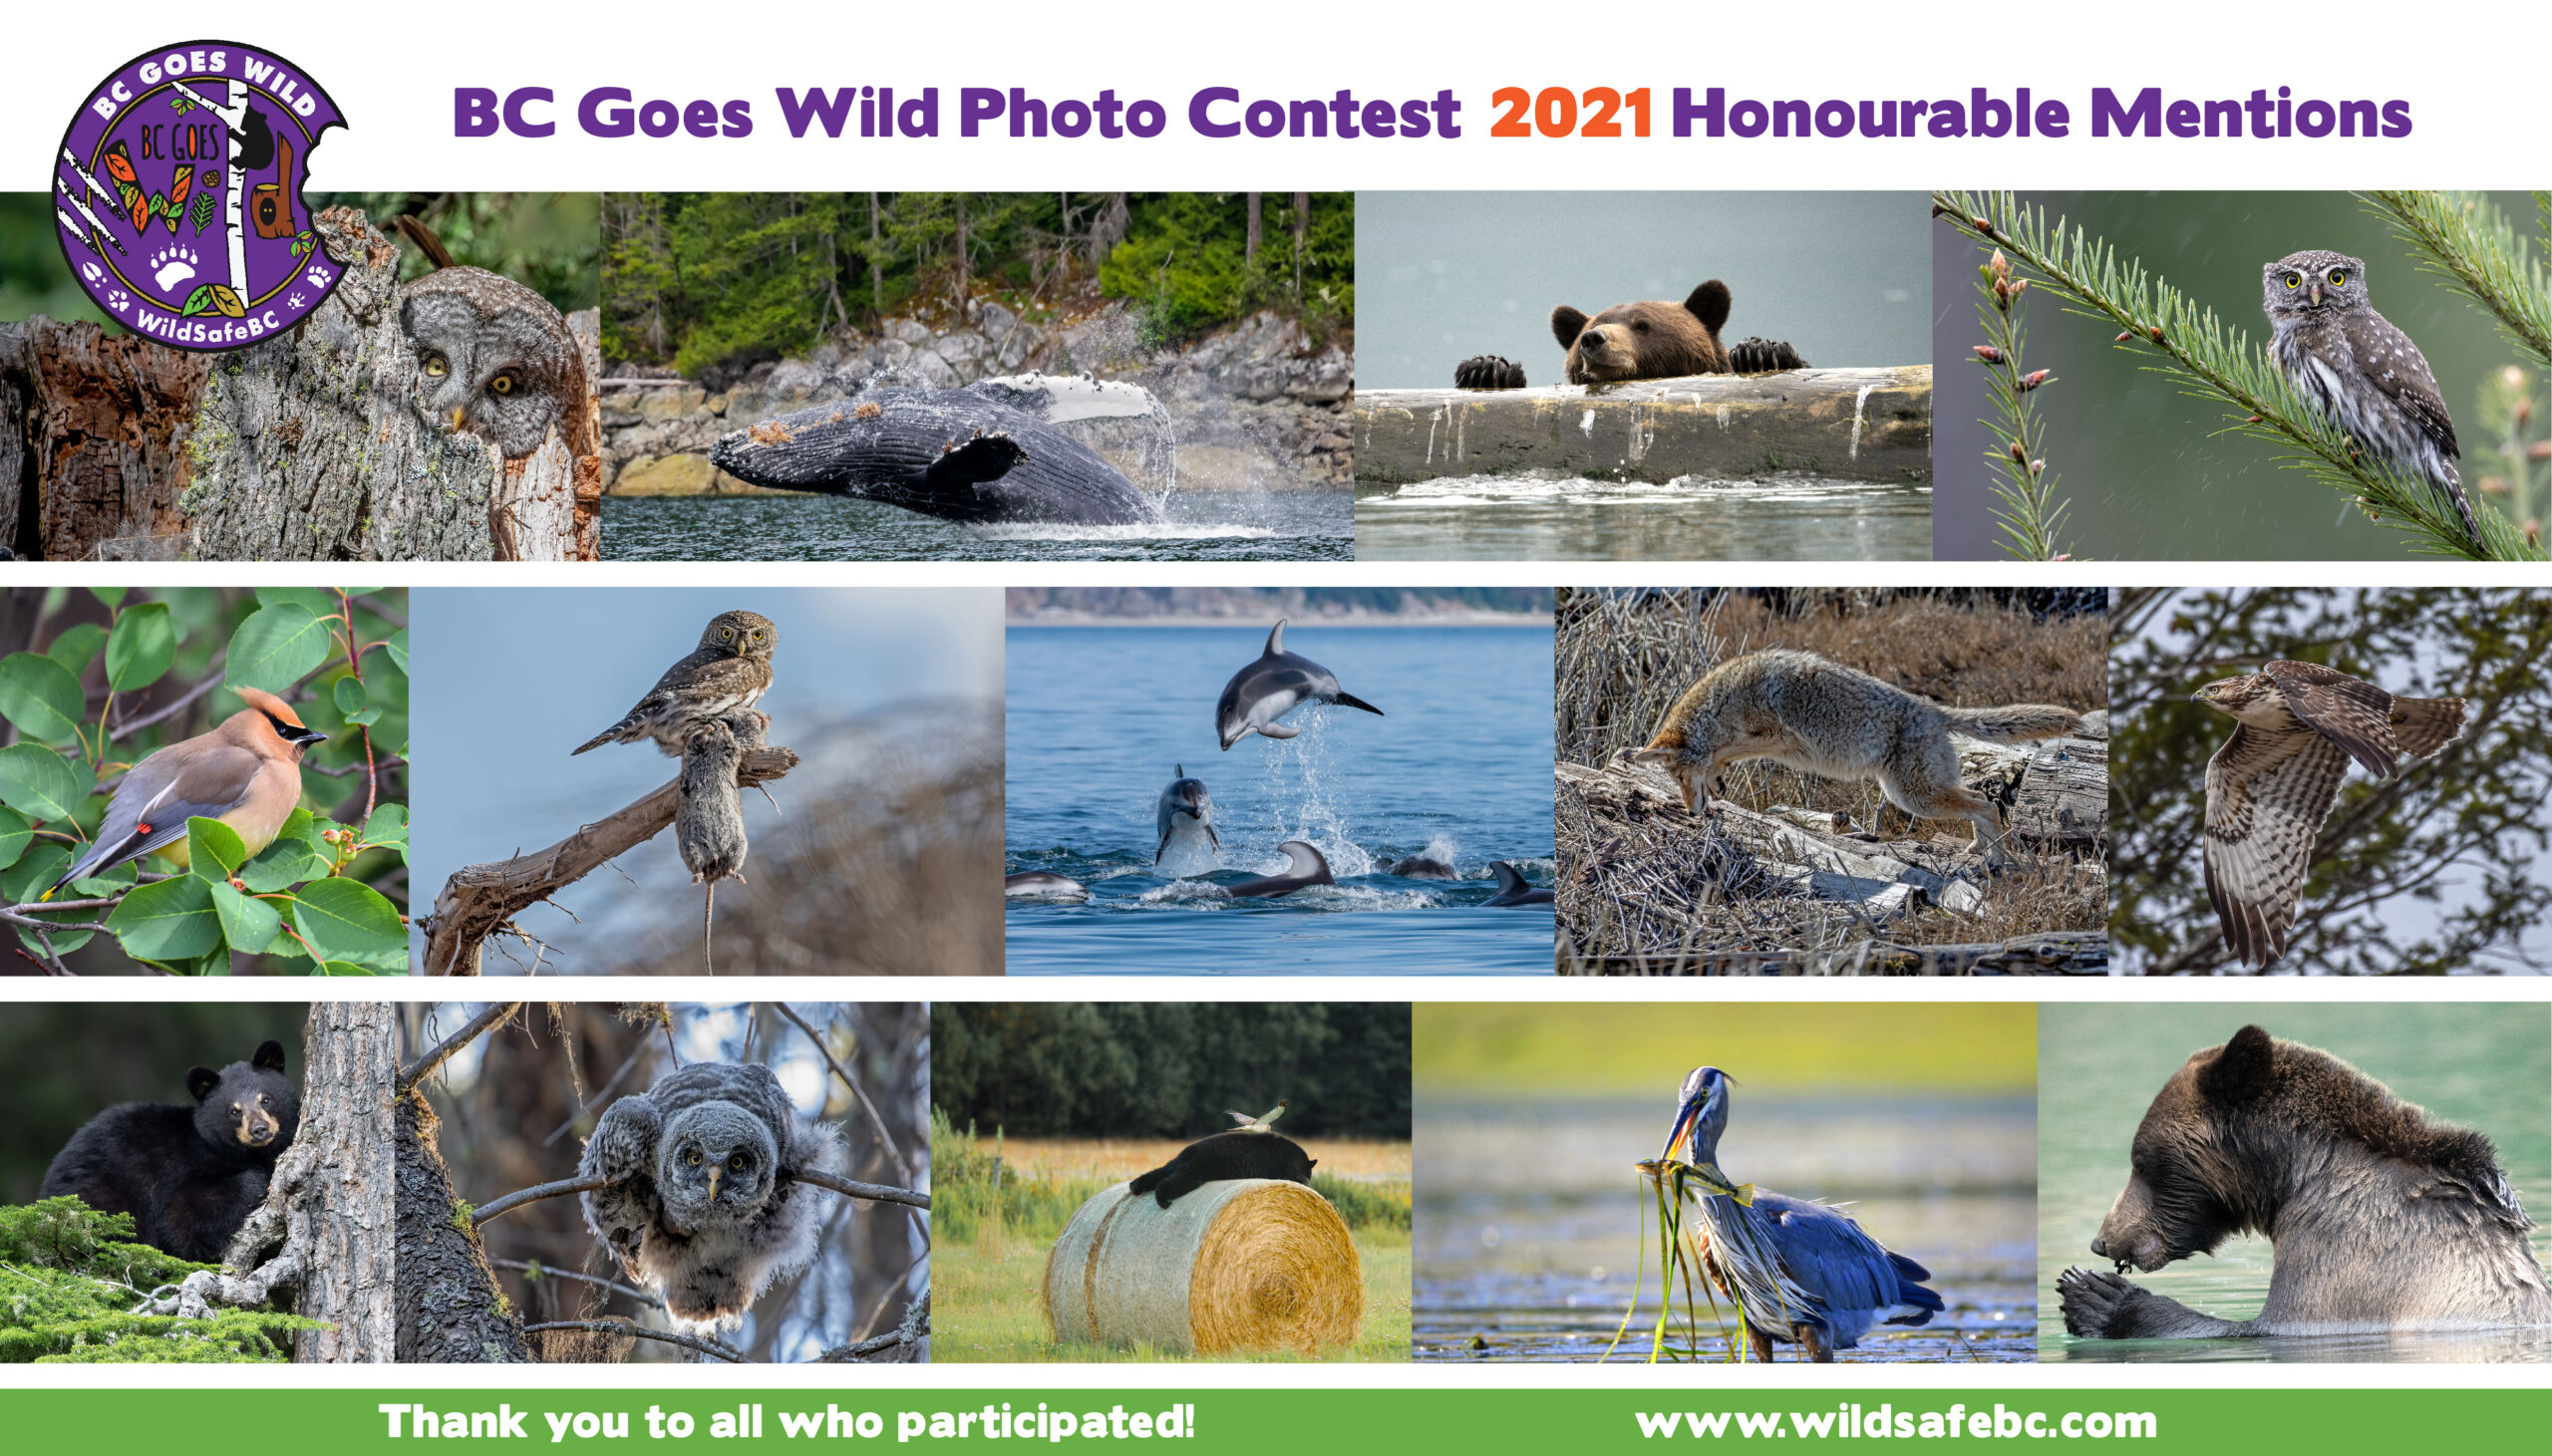 BCGW Photo Contest Honourable Mentions 2021-01